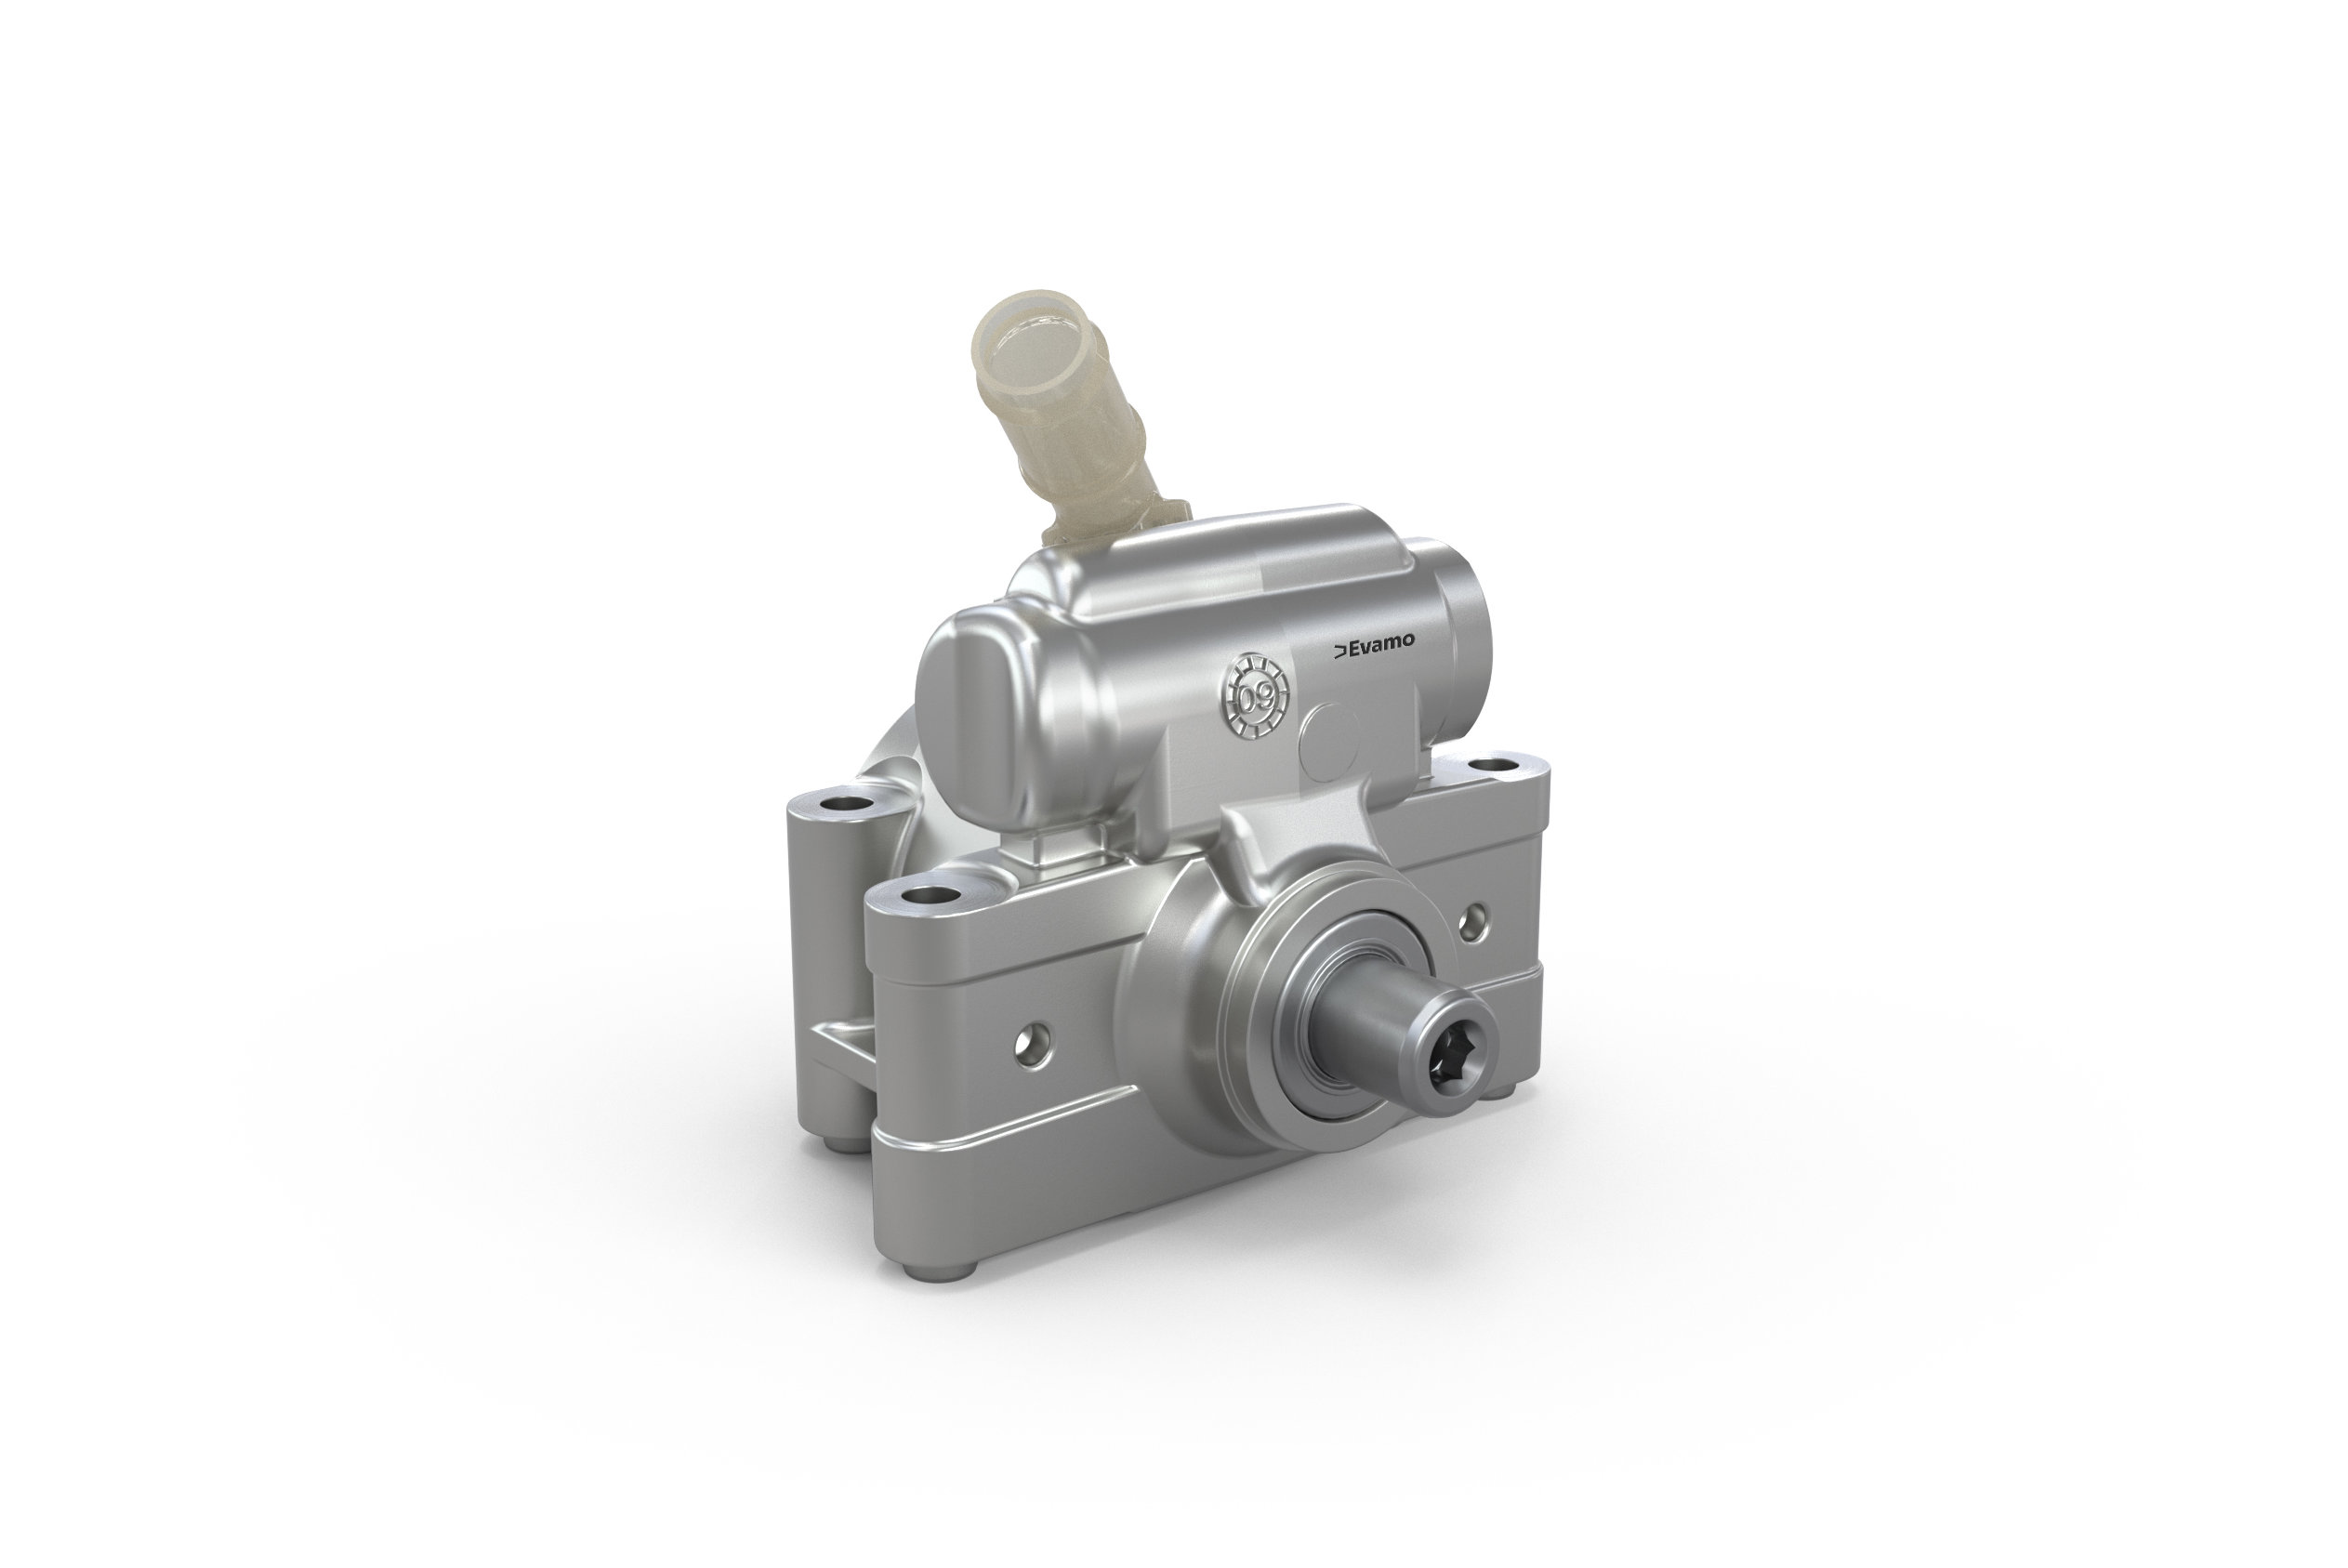 The modern product design of the FPC3 car power steering pump enables energy savings thanks to the pressure relief valve in the valve piston.